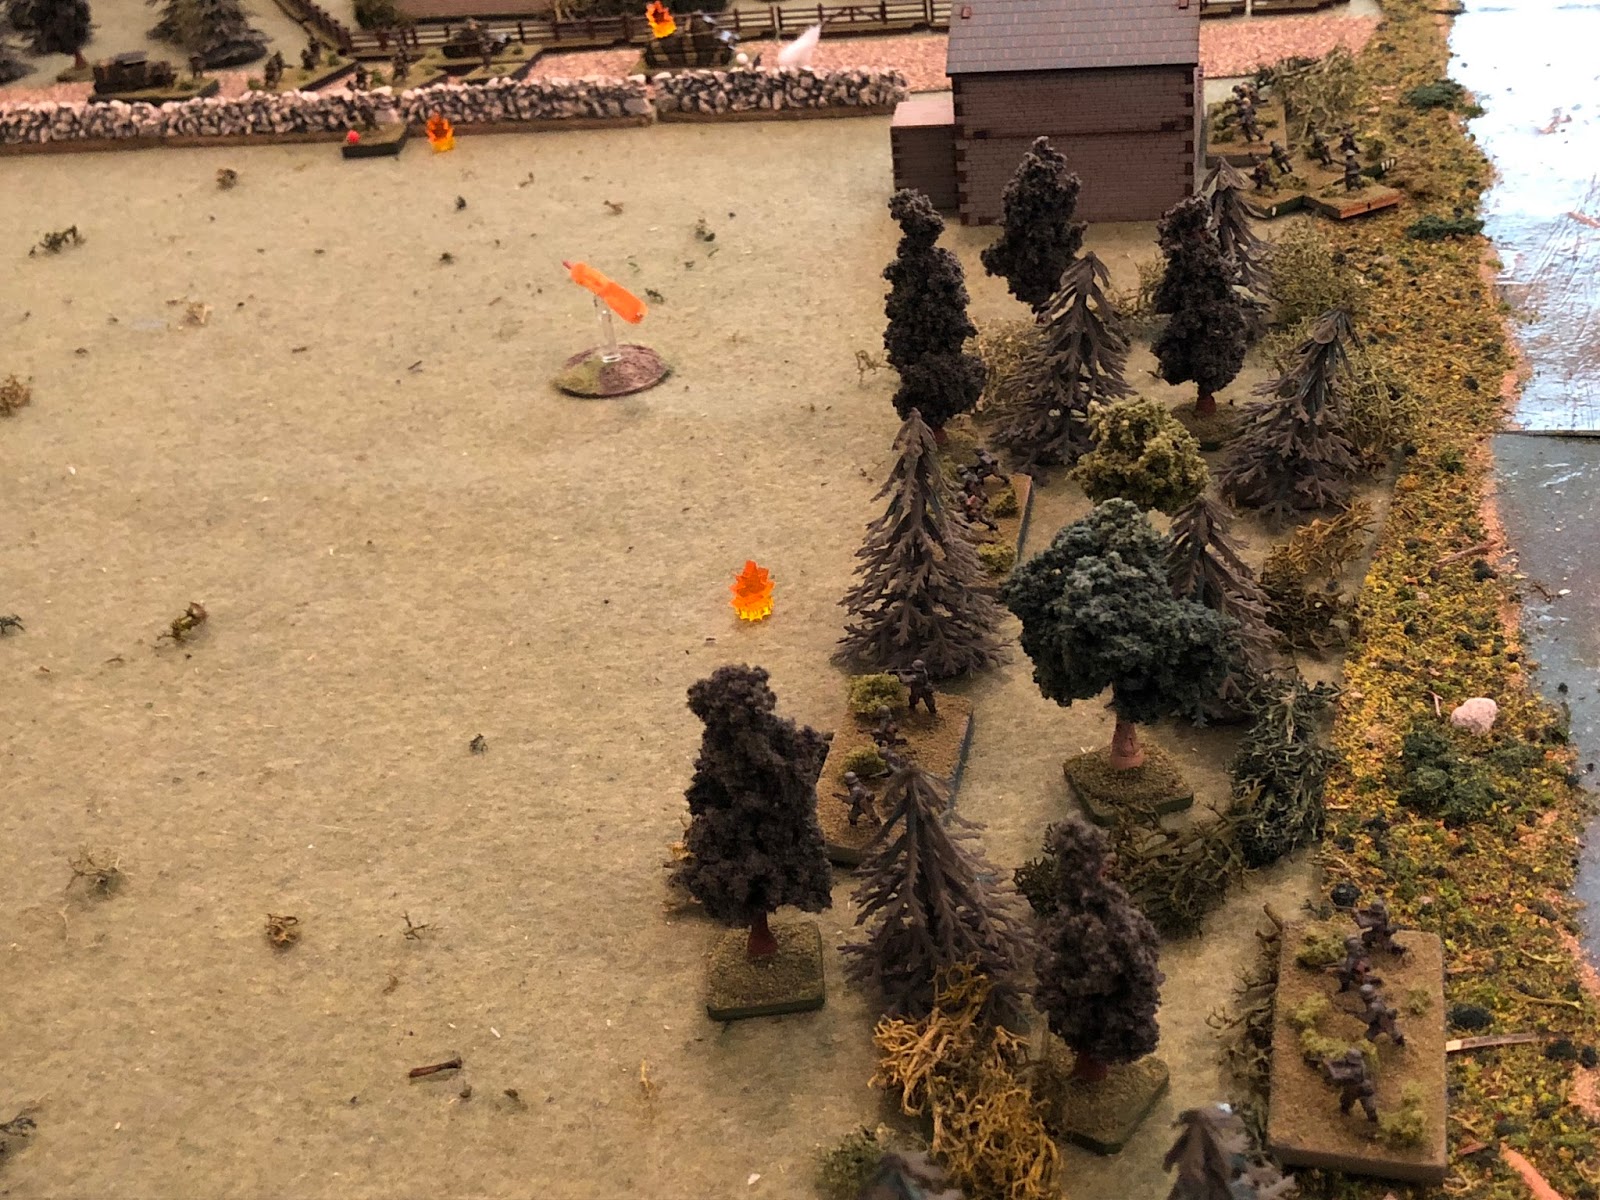  Thee German Motorcycle Platoon (center to bottom right) has two squads pinned and one lollygagging around in the rear, but begins directing small arms fire at the French 2nd Platoon on main street (top center to top left), trying to protect the engi